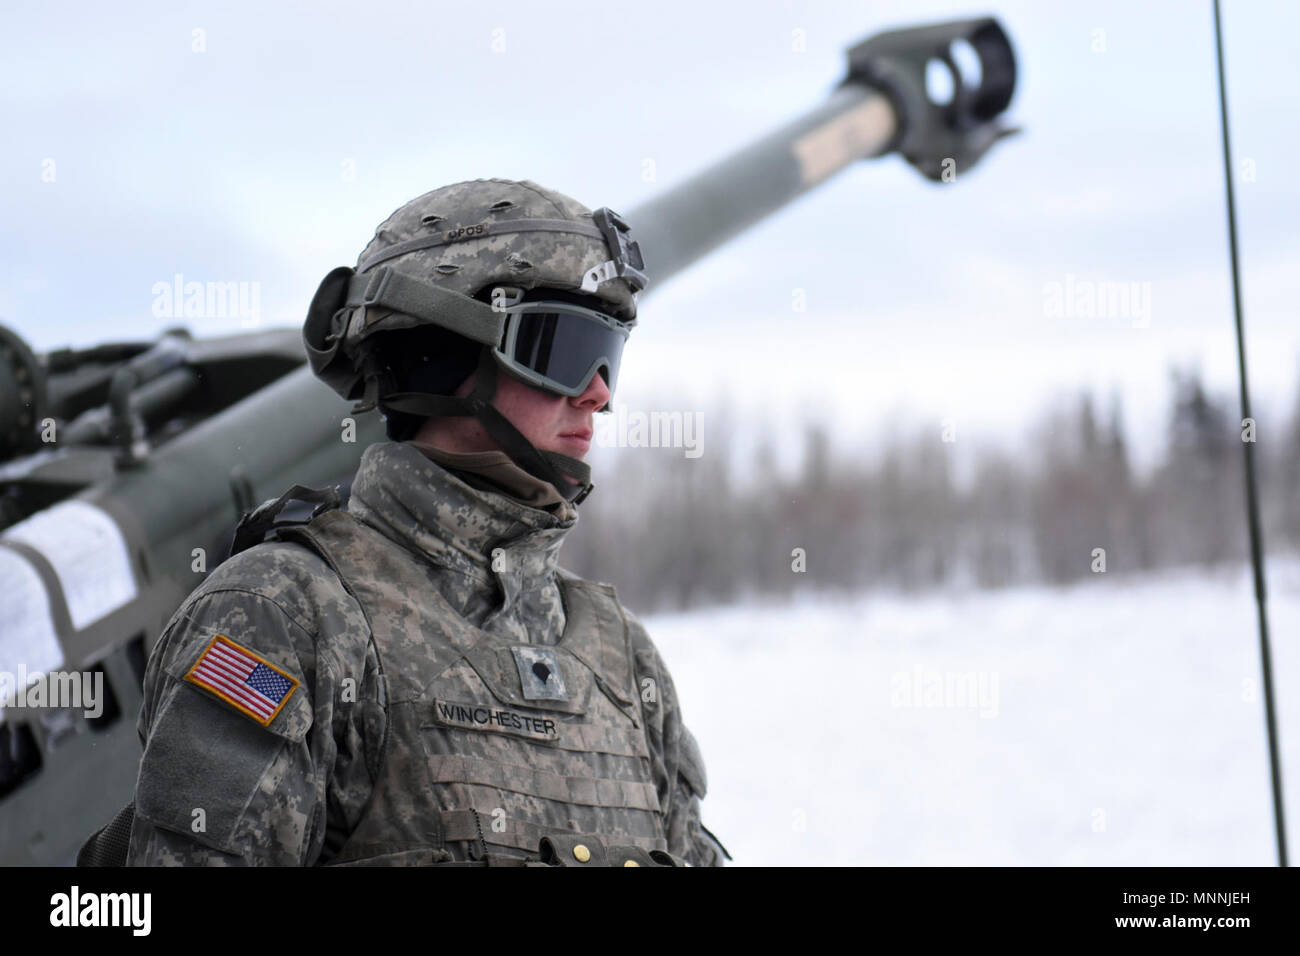 A Soldier assigned to 1st Stryker Brigade Combat Team, 25th Infantry Division, 2nd Battalion, 8th Field Artillery Regiment waits to fire a M777 155mm Howitzer March 15 during a live fire training exercise at Fort Greely, Alaska, as part of the U.S. Army Alaska-led Joint Force Land Component Command in support of Alaskan Command's exercise Arctic Edge 18 conducted under the authority of U.S. Northern Command. Arctic Edge 2018 is a biennial, large-scale, joint-training exercise that prepares and tests the U.S. military's ability to operate tactically in the extreme cold-weather conditions found  Stock Photo